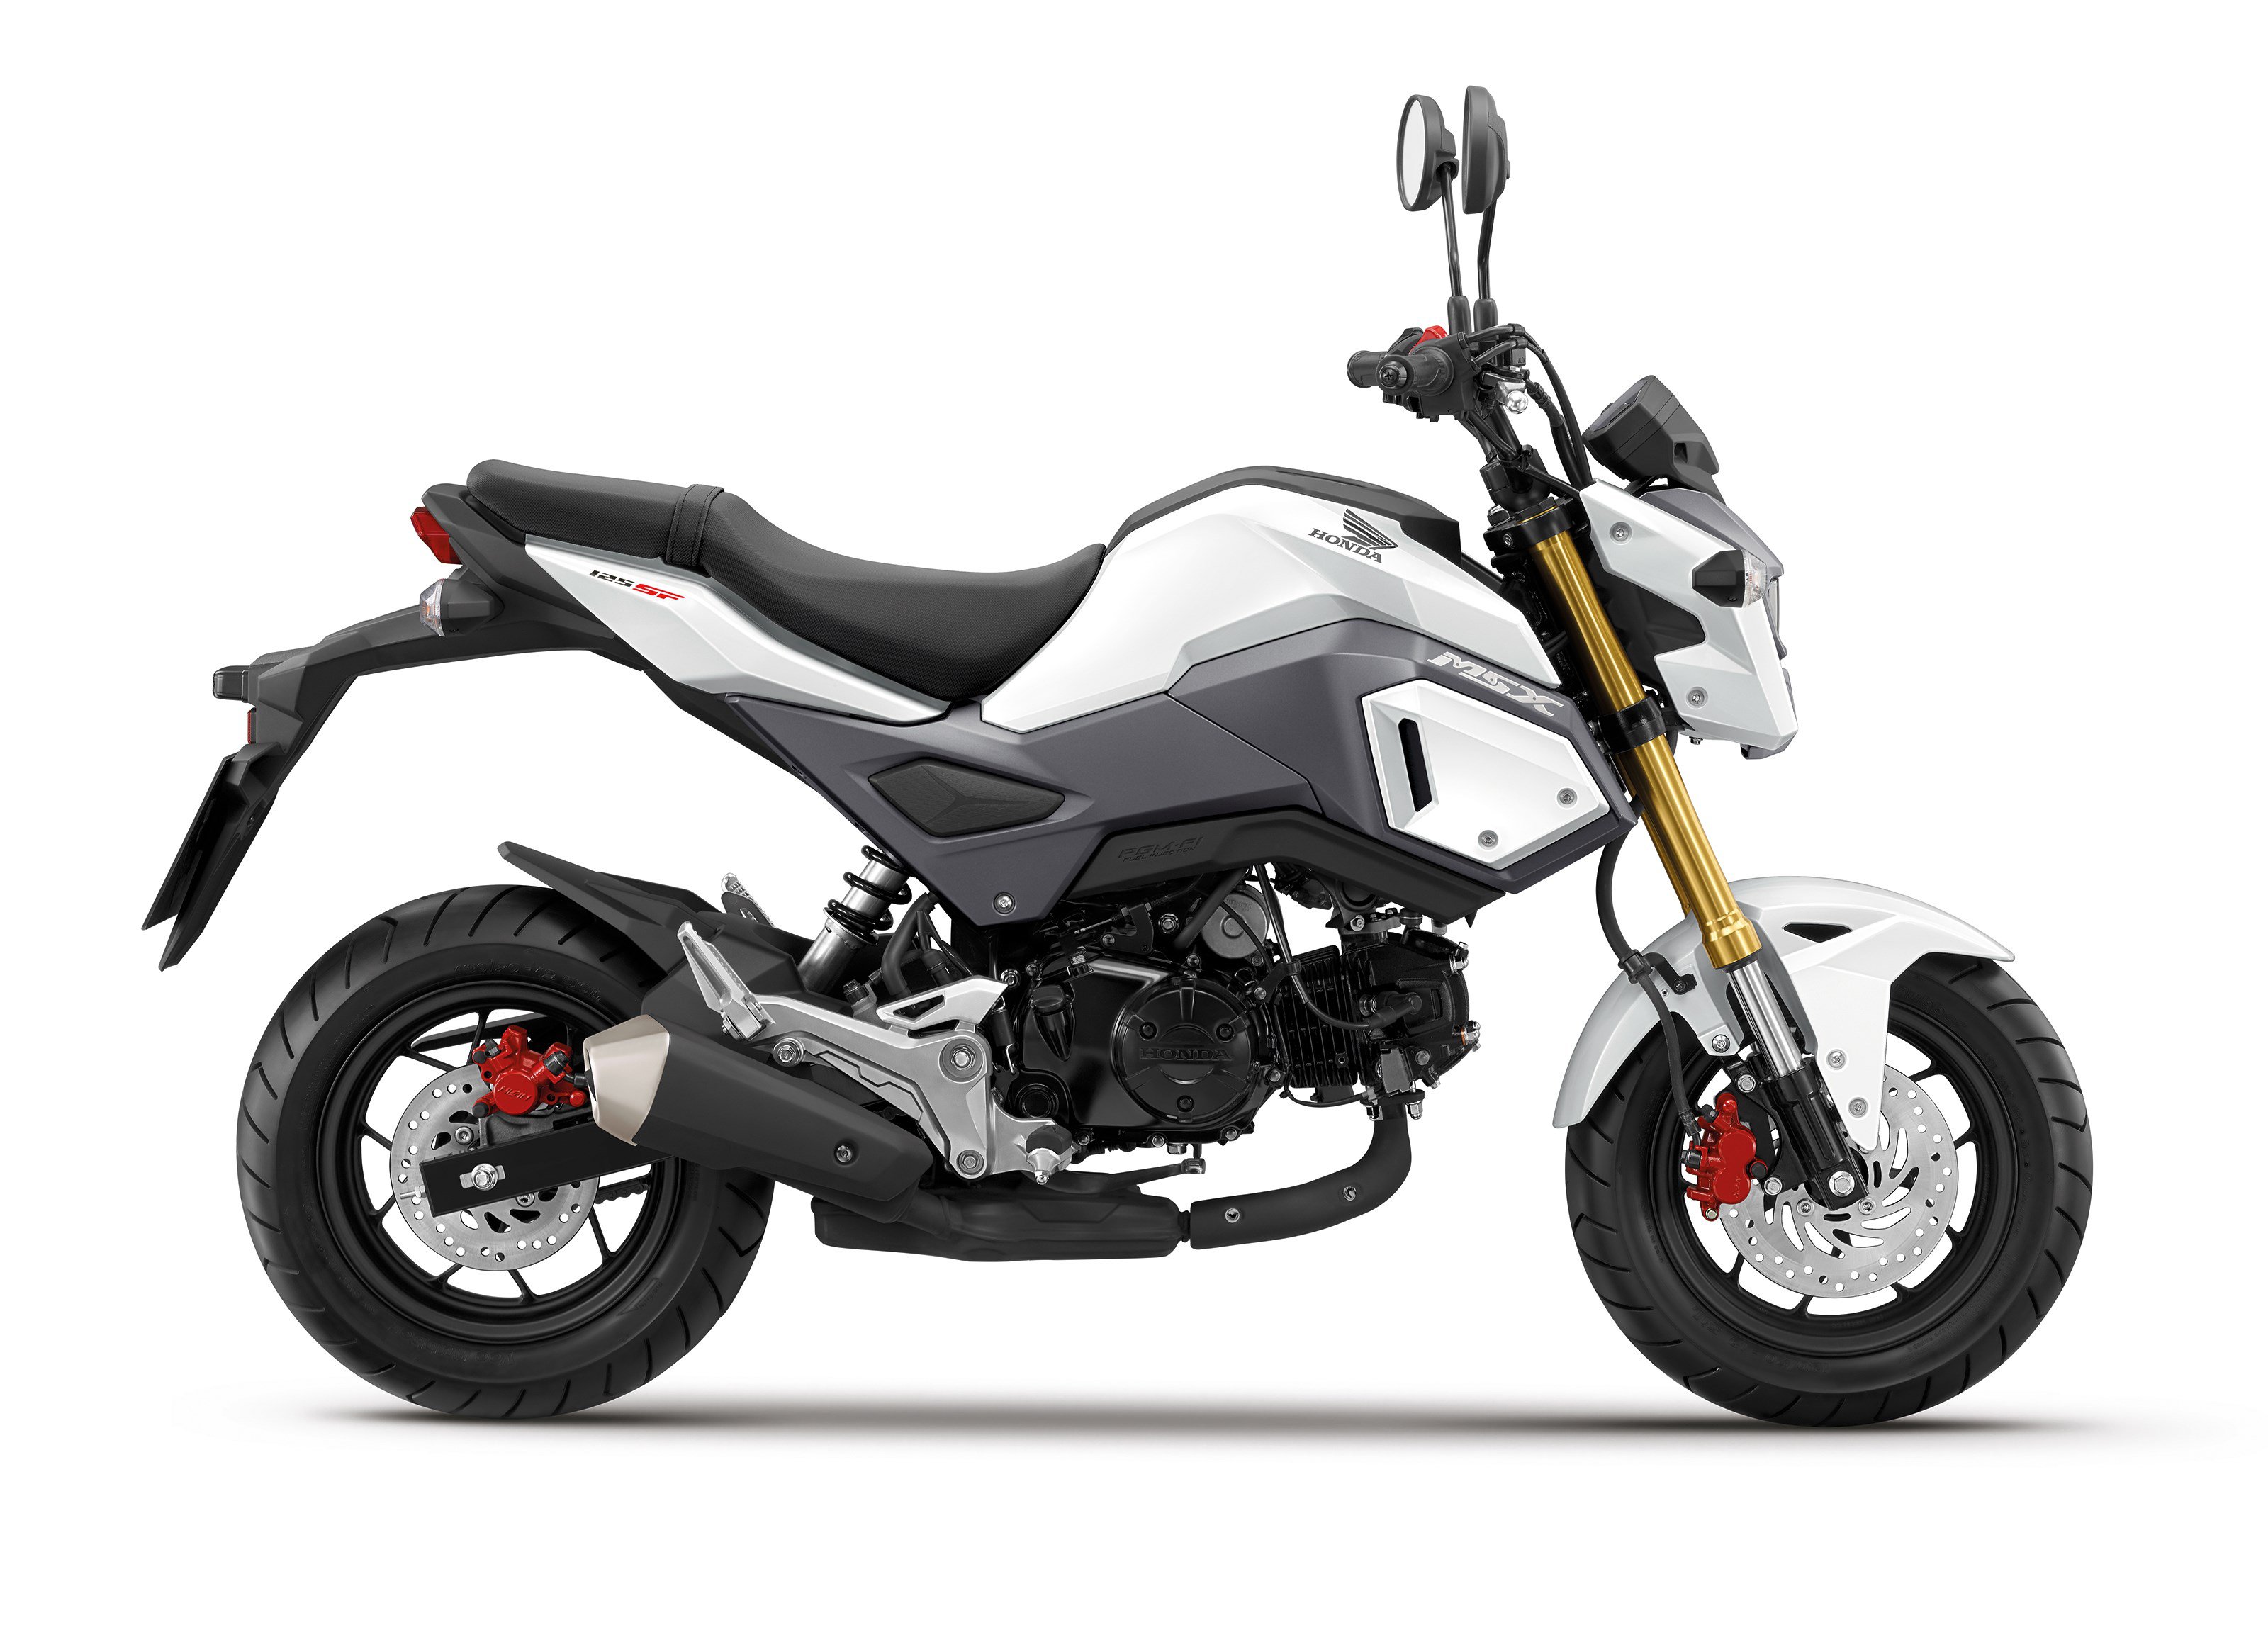 Honda Grom Backgrounds, Compatible - PC, Mobile, Gadgets| 3200x2300 px